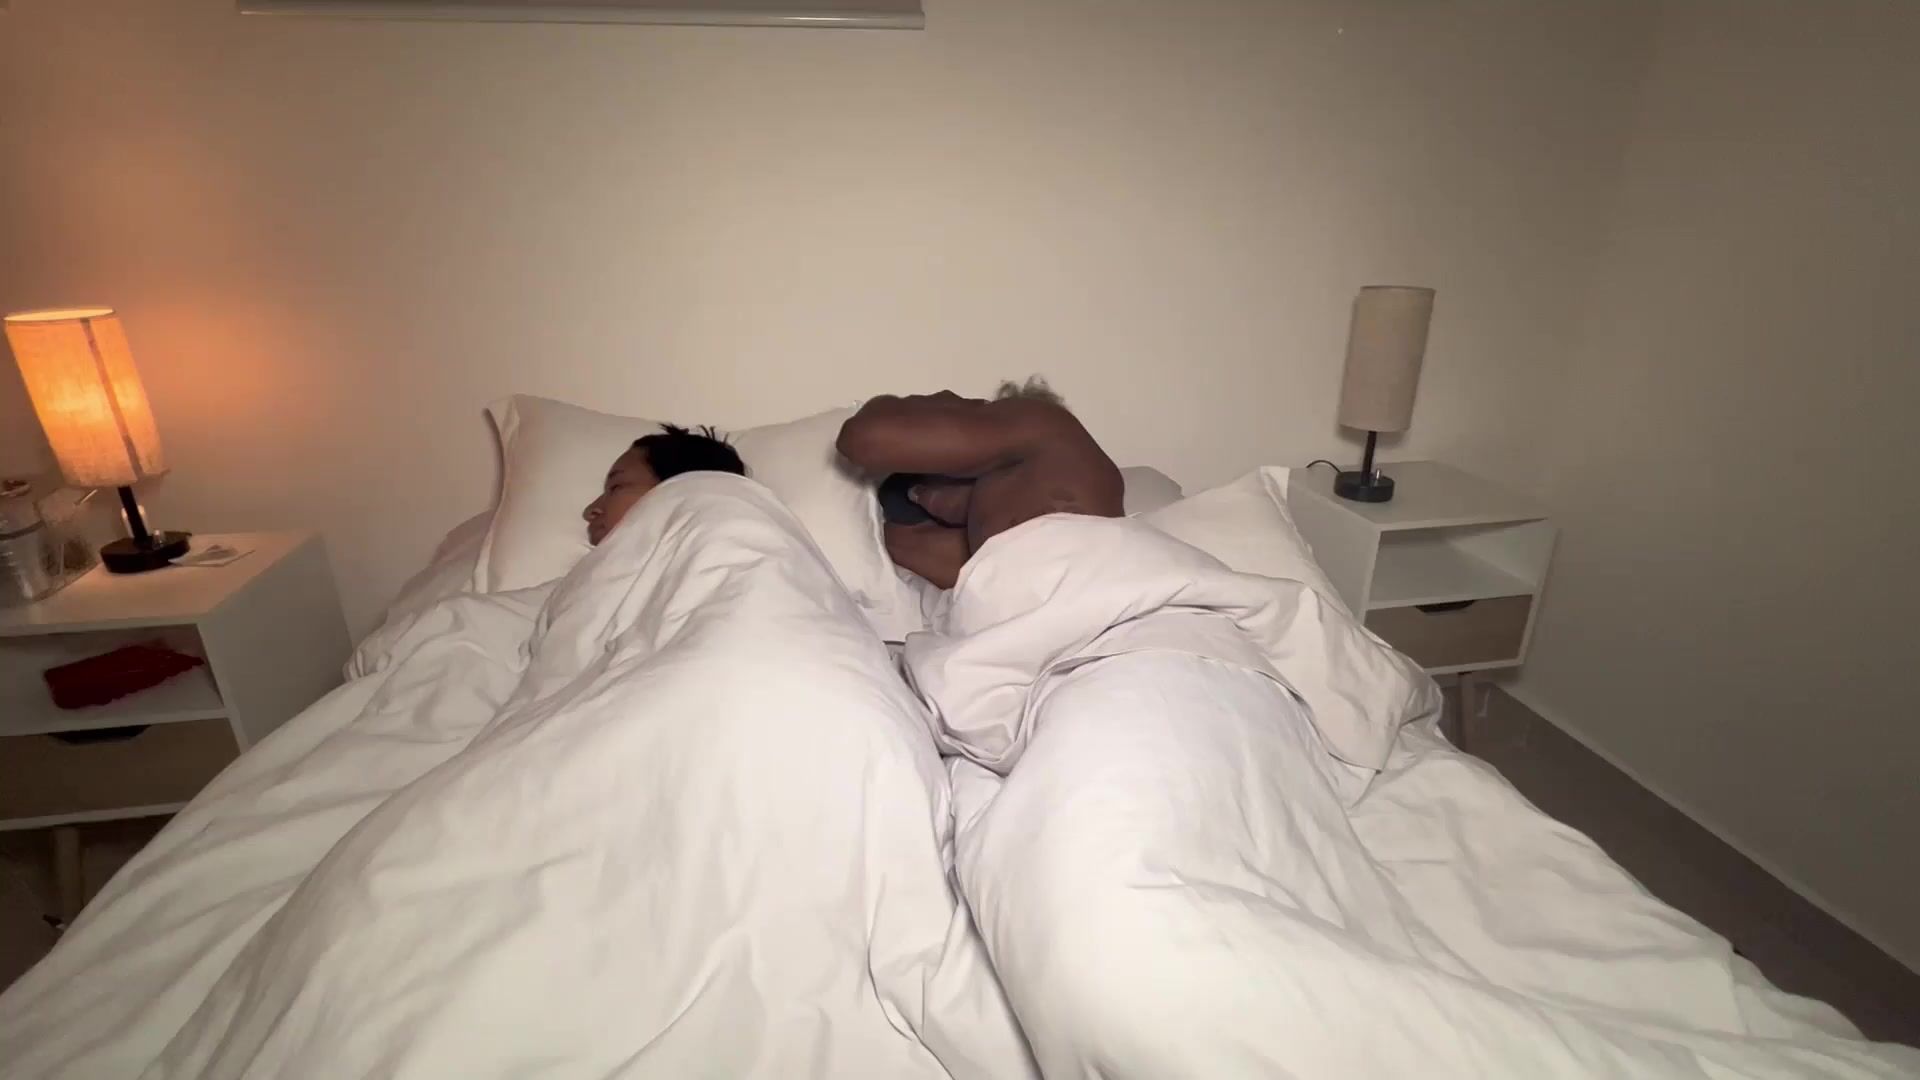 Free HD Step Mom And Step Son Share a Bed In A Hotel Room pic